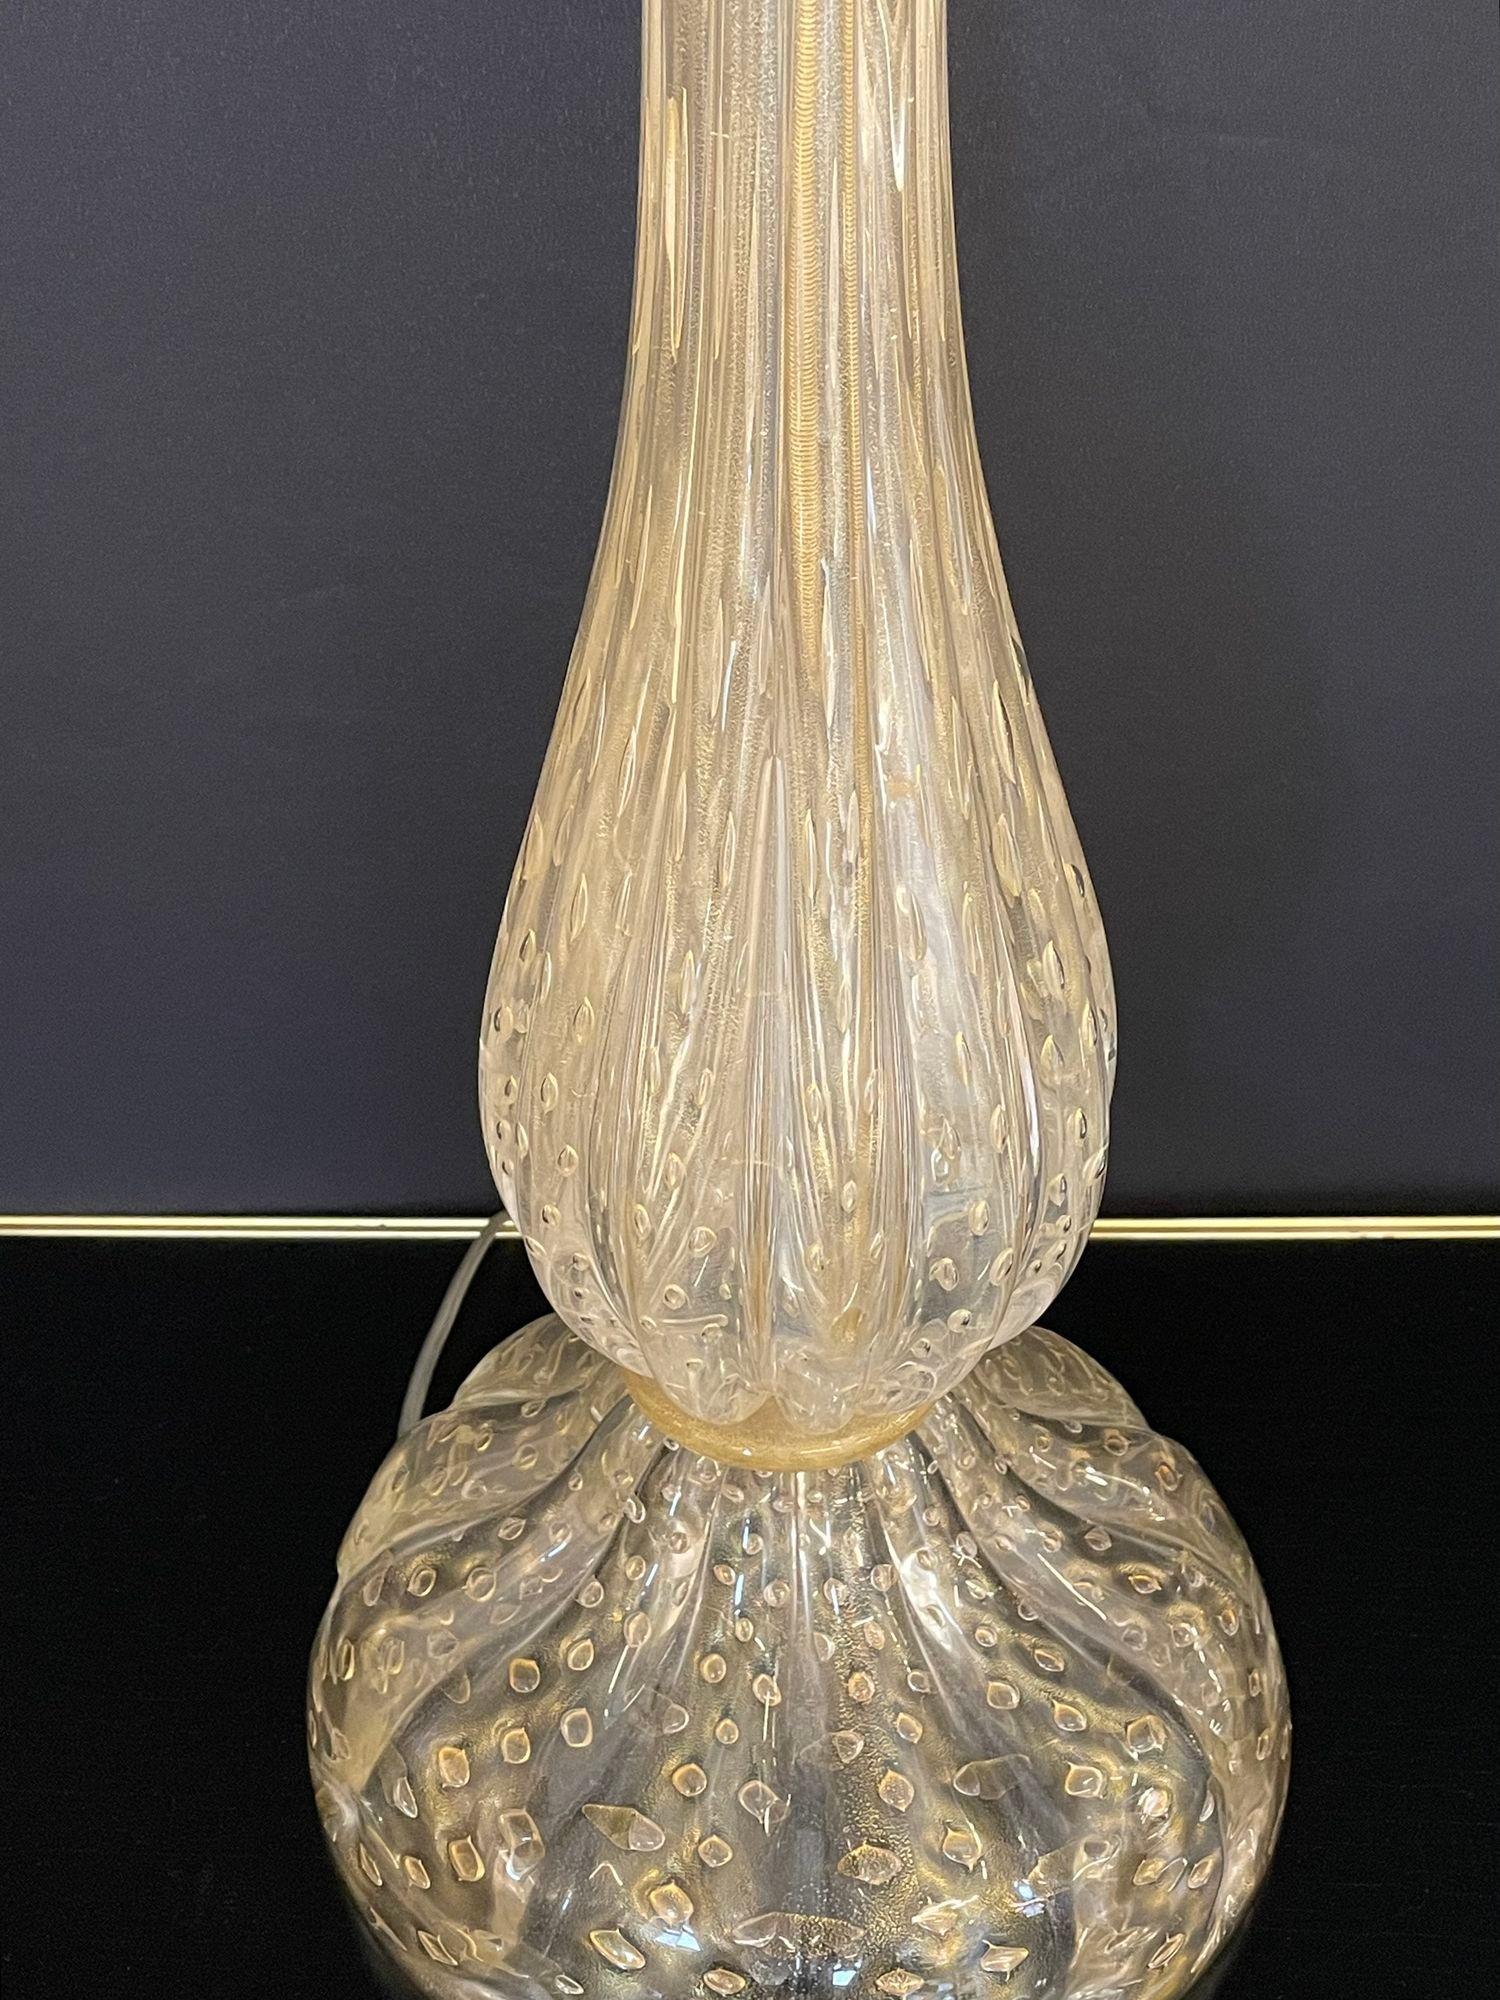 Large Italian Murano Glass Table Lamp, Mid-Century Modern, Barovier Toso Style For Sale 2